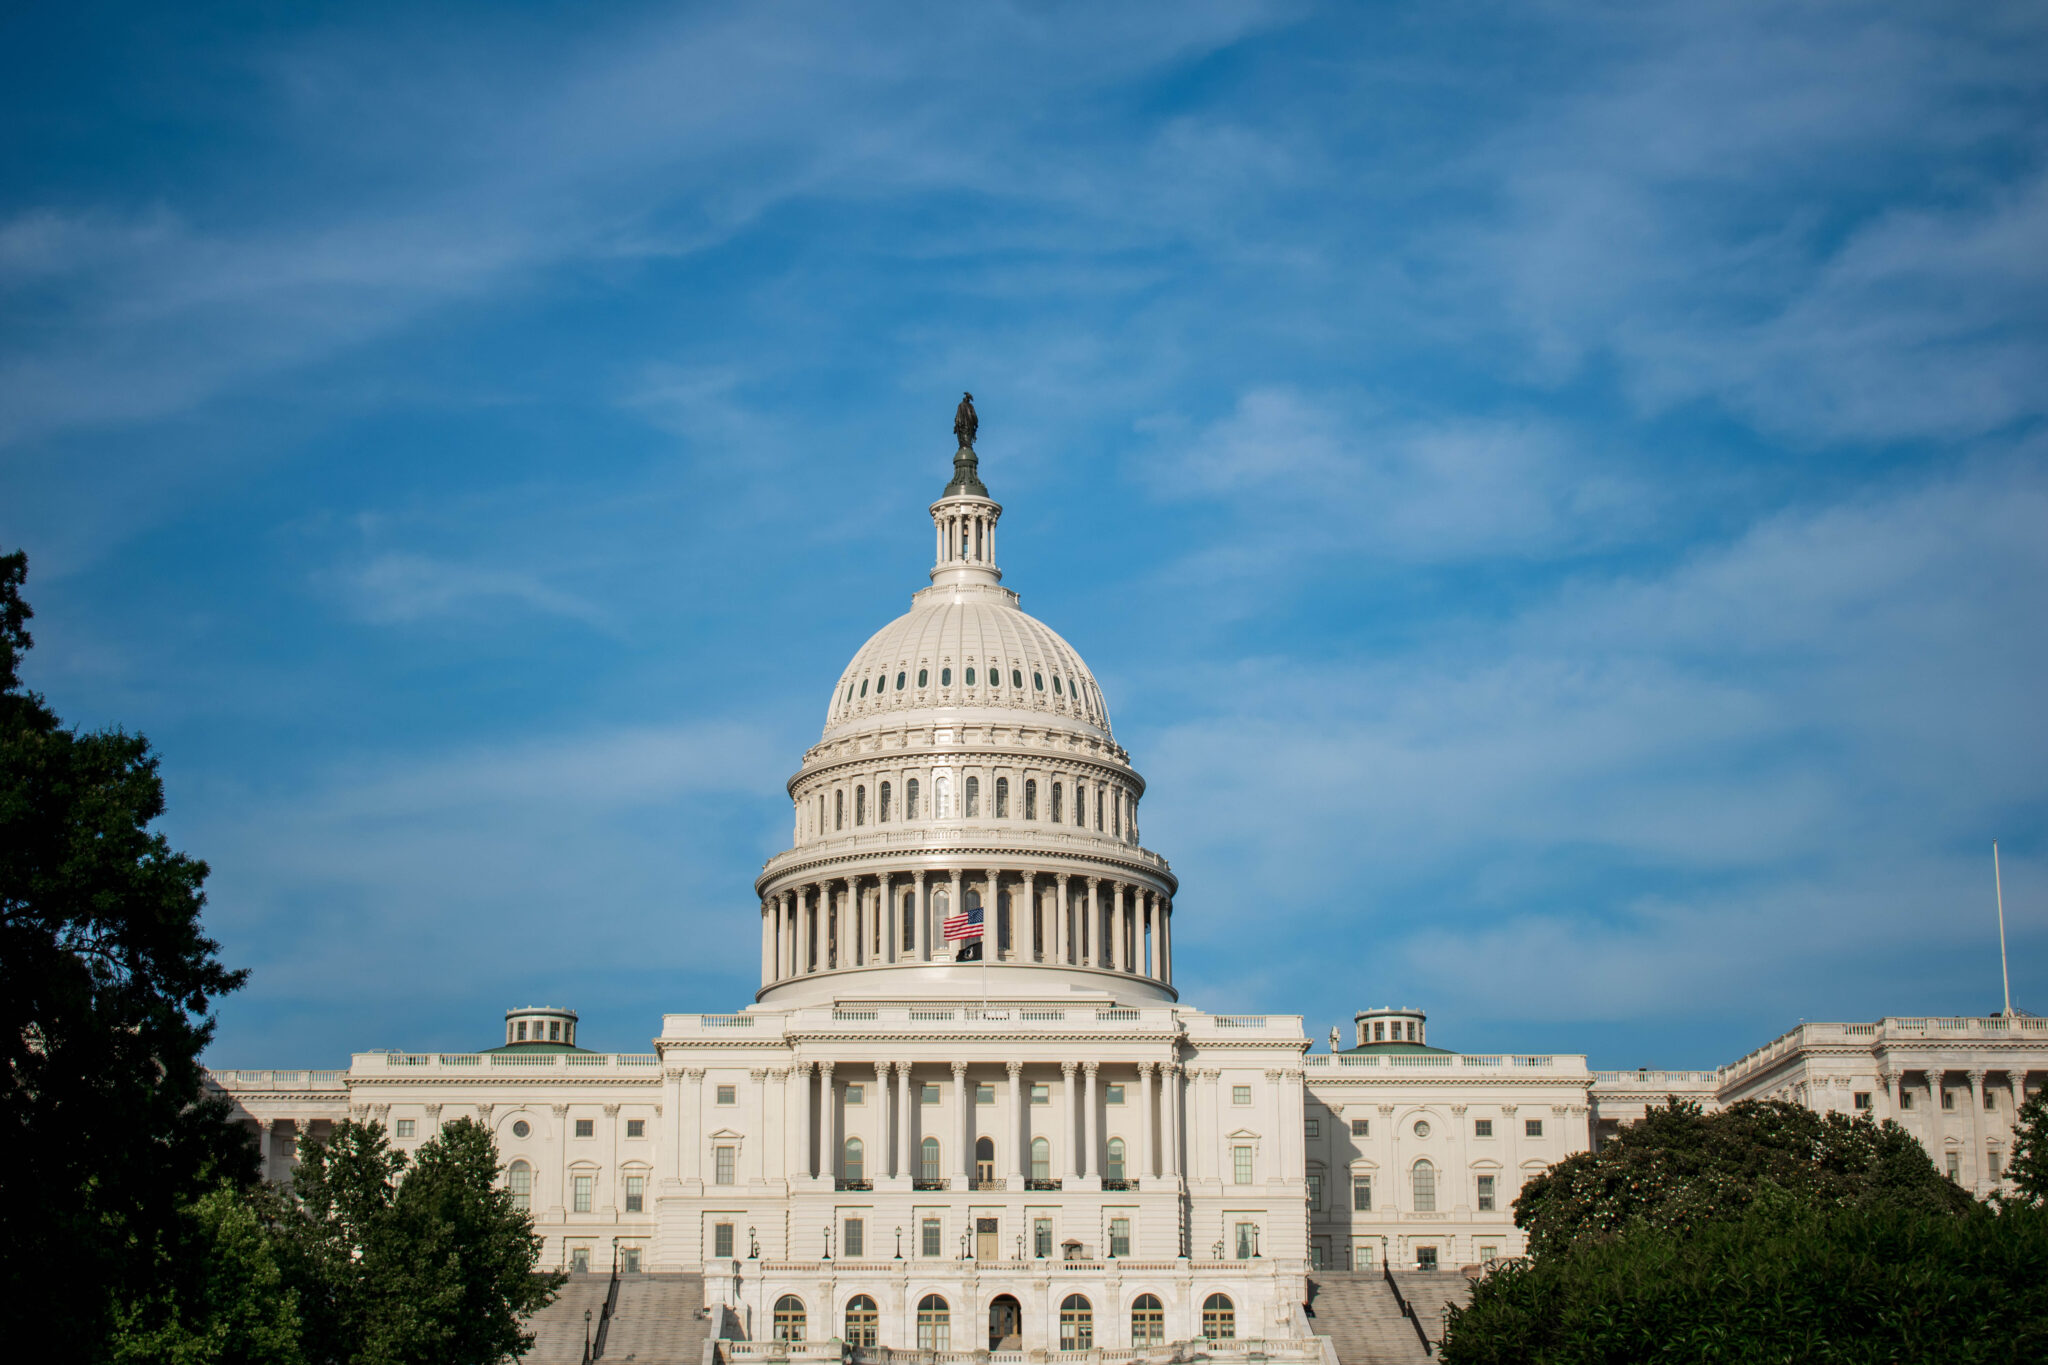 The US Oncology Network Welcomes the 118th Congress